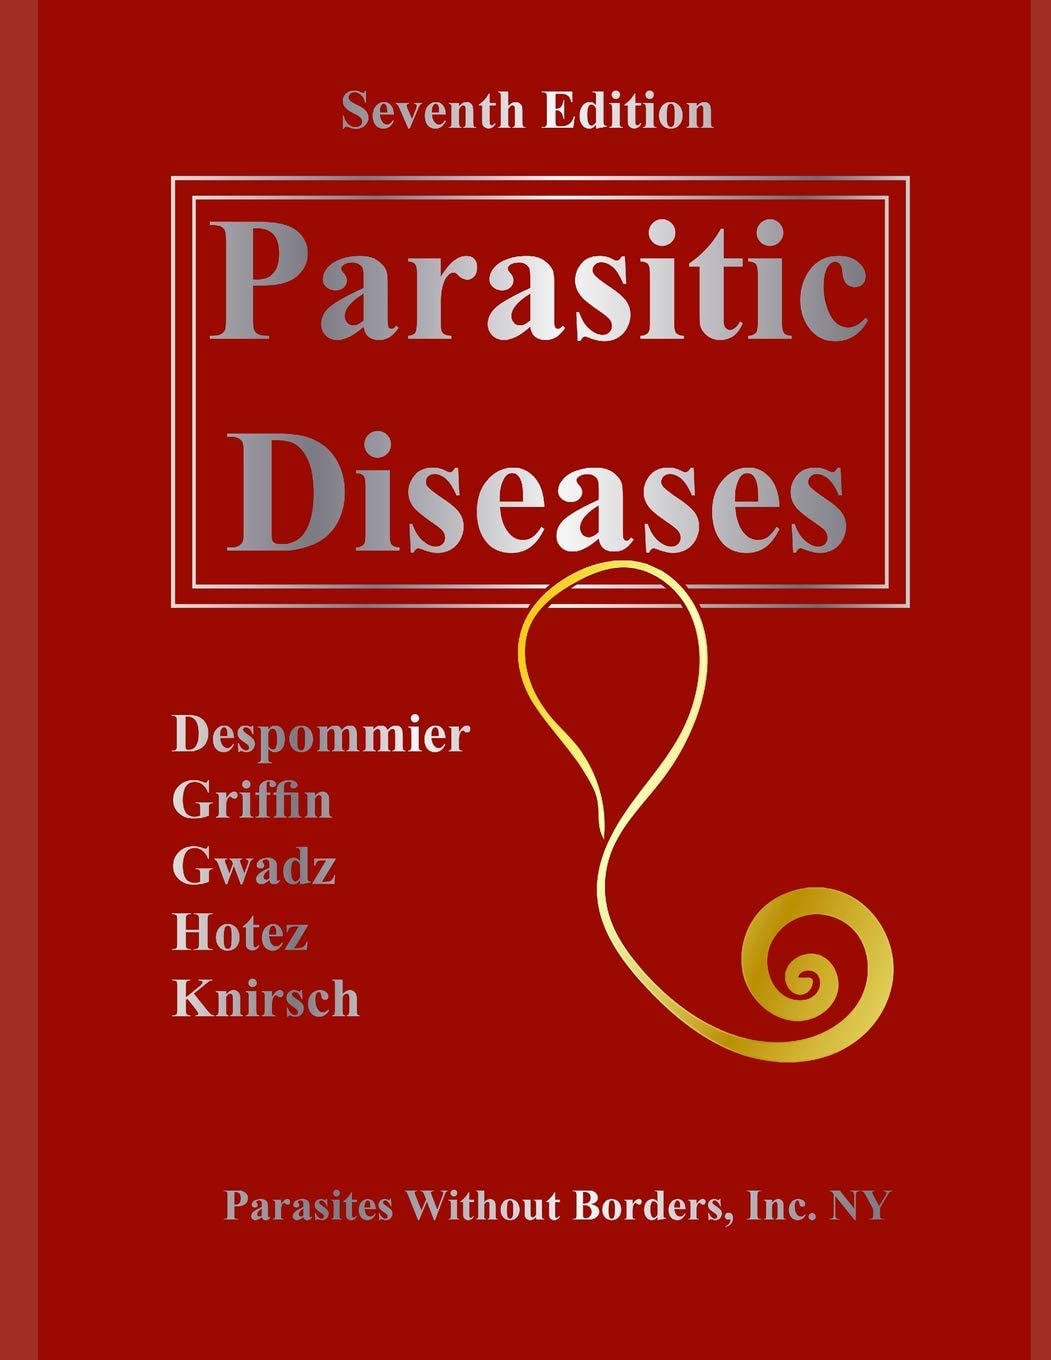 Parasitic Diseases 7th Edition